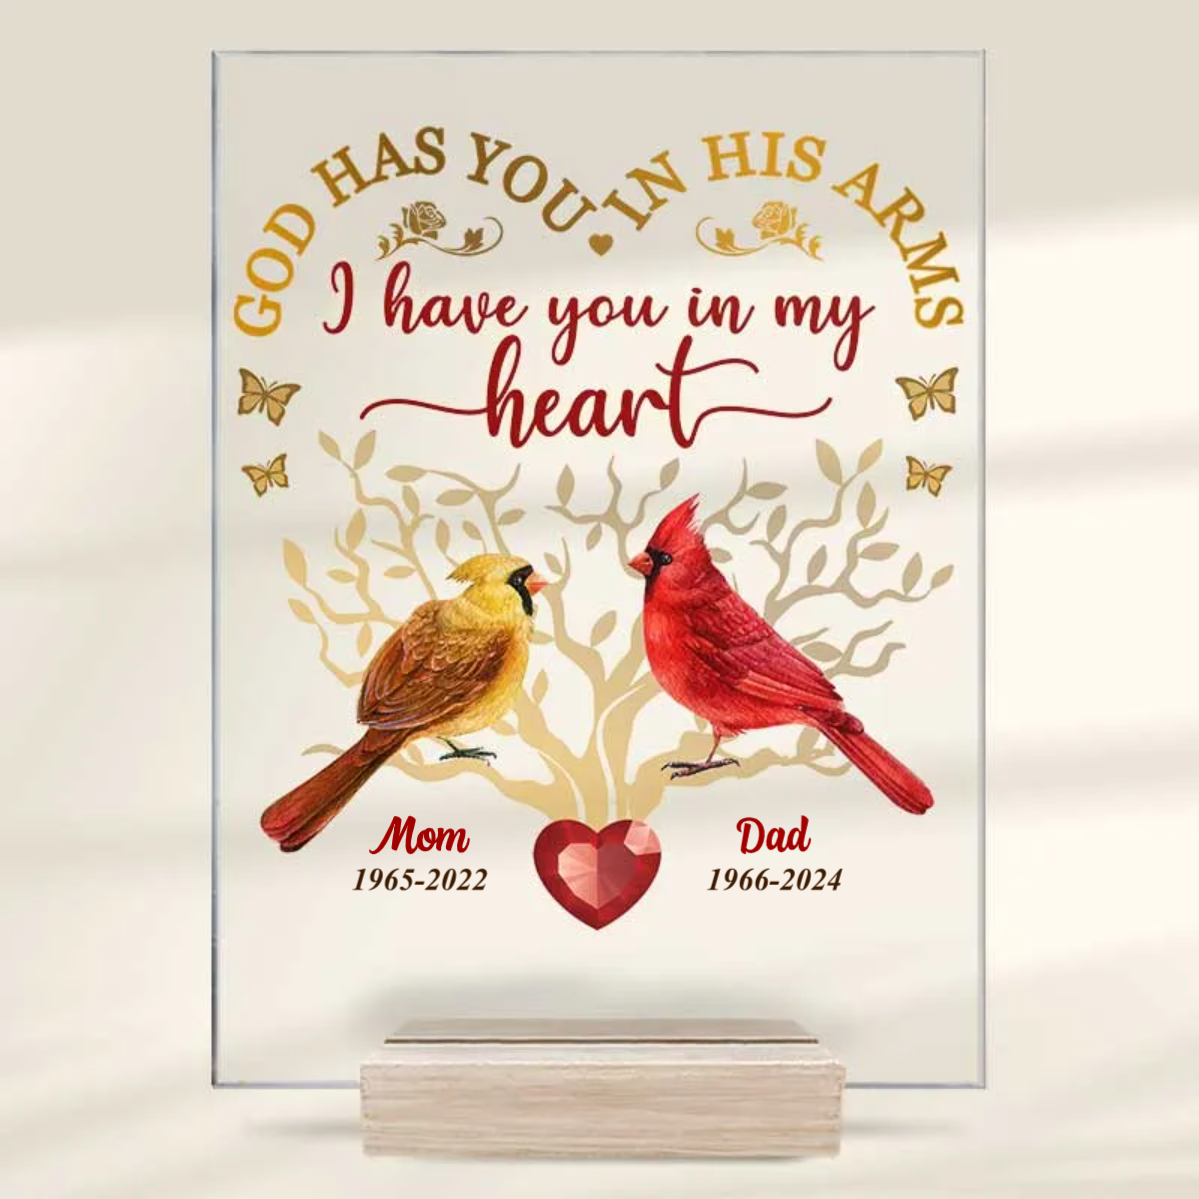 I Have You In My Heart - Memorial Gift For Family - Personalized Acrylic Plaque